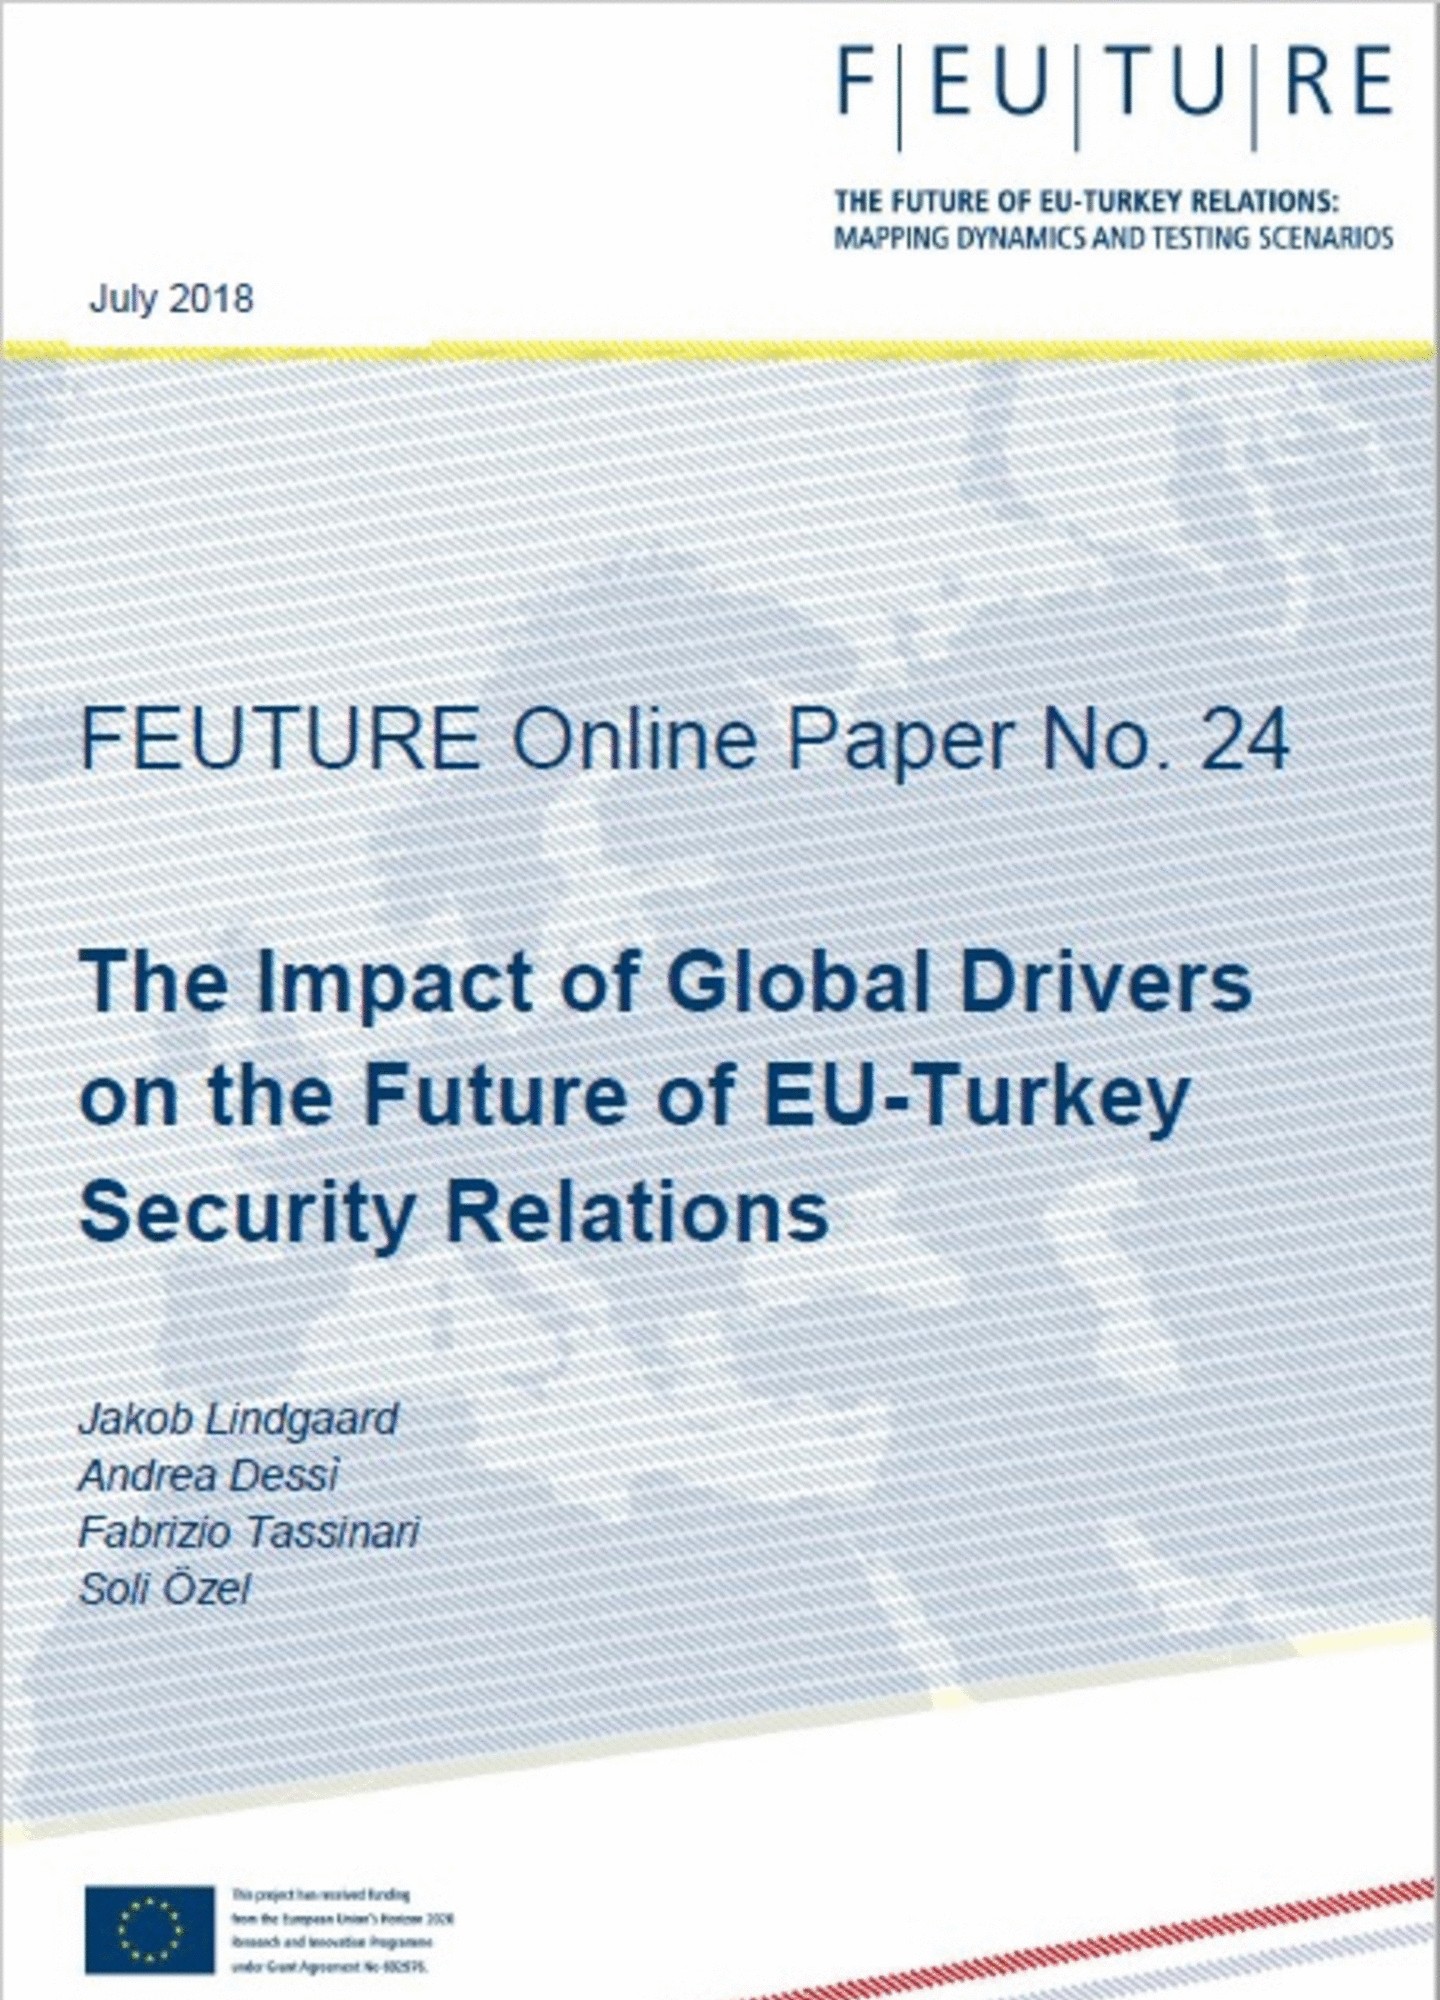 The Impact of Global Drivers on the Future of EU-Turkey Security Relations